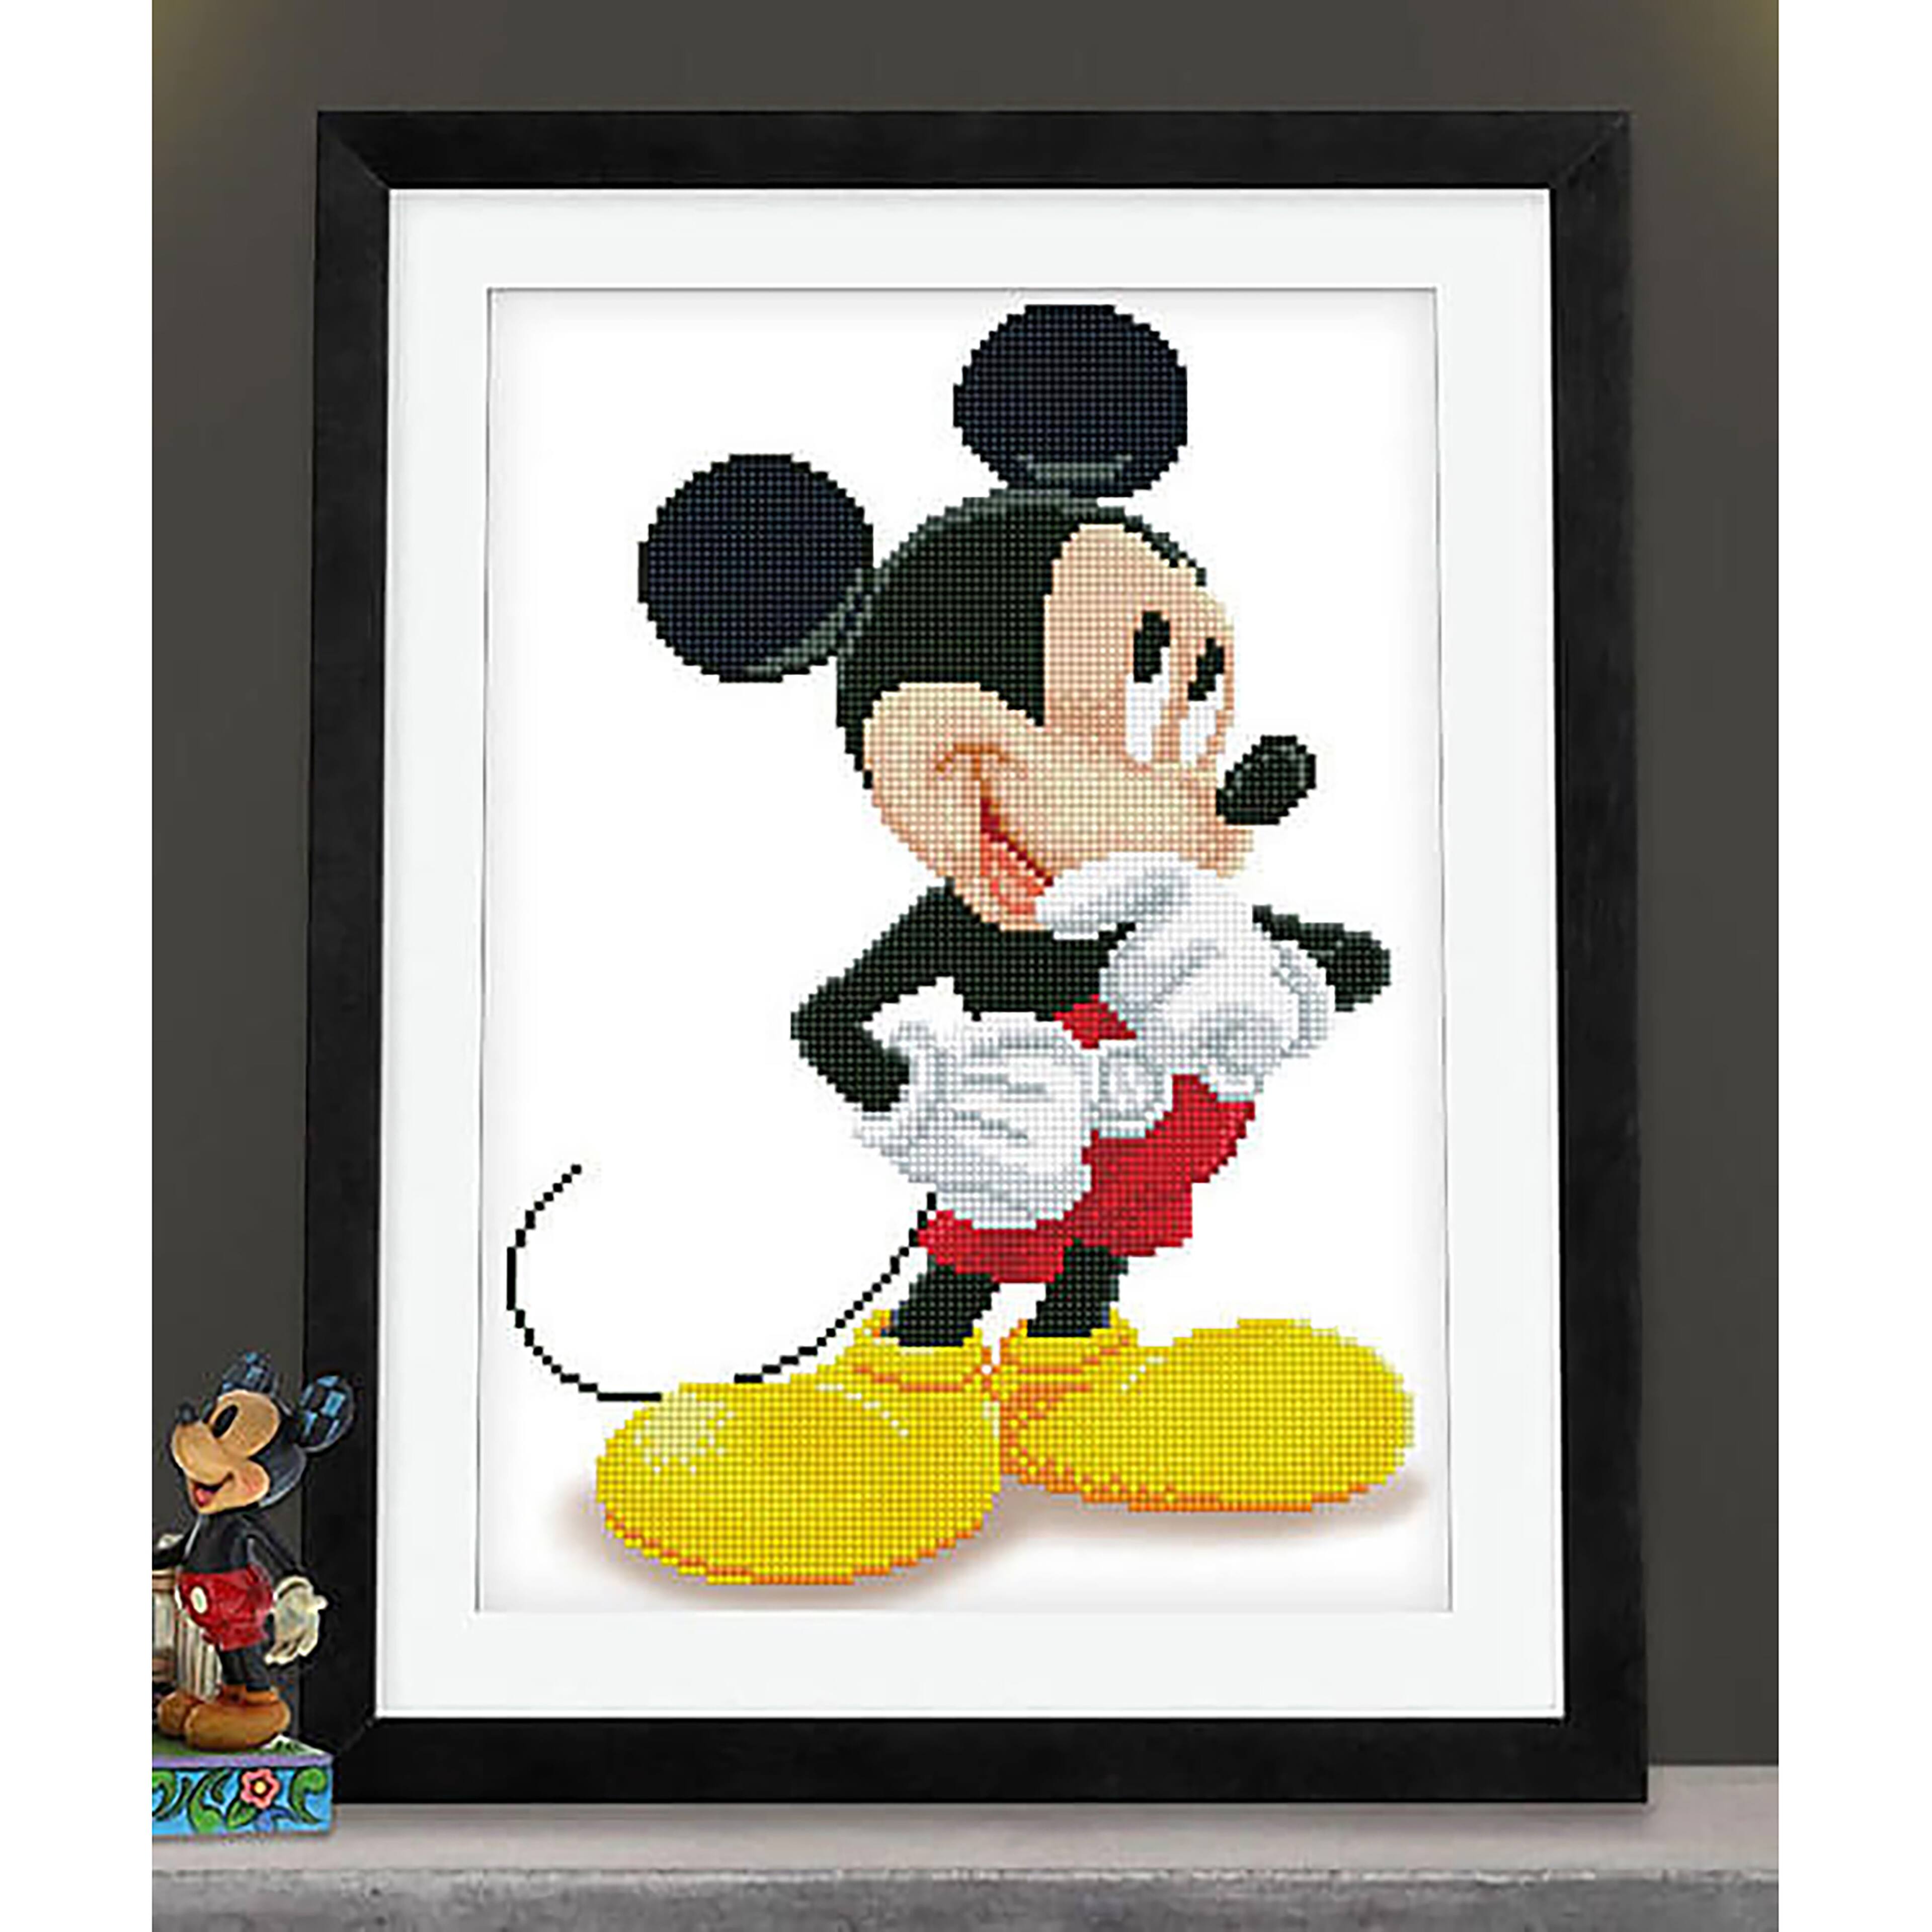 Mickey Mouse Completed Diamond Painting